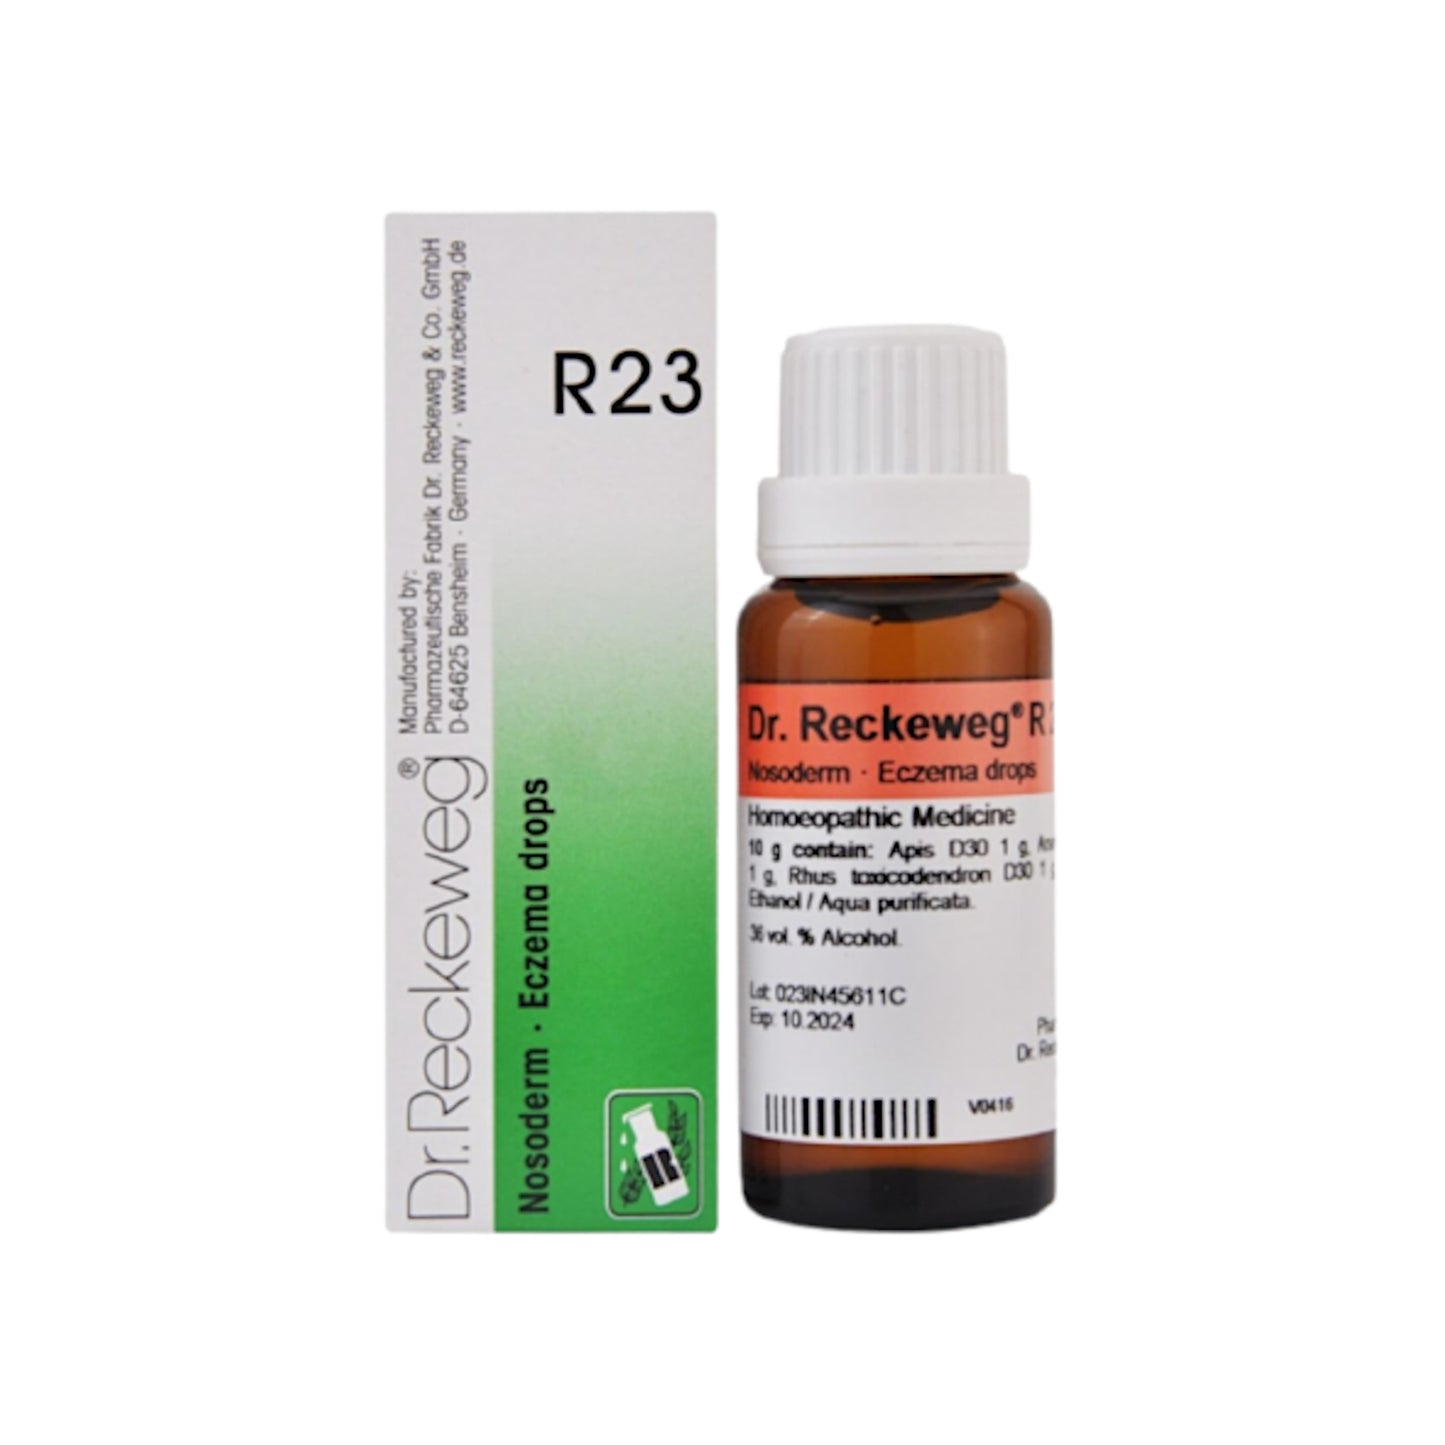 Image for DR. RECKEWEG R23 - Nosoderm Eczema Drops for Eczema and Skin Conditions.